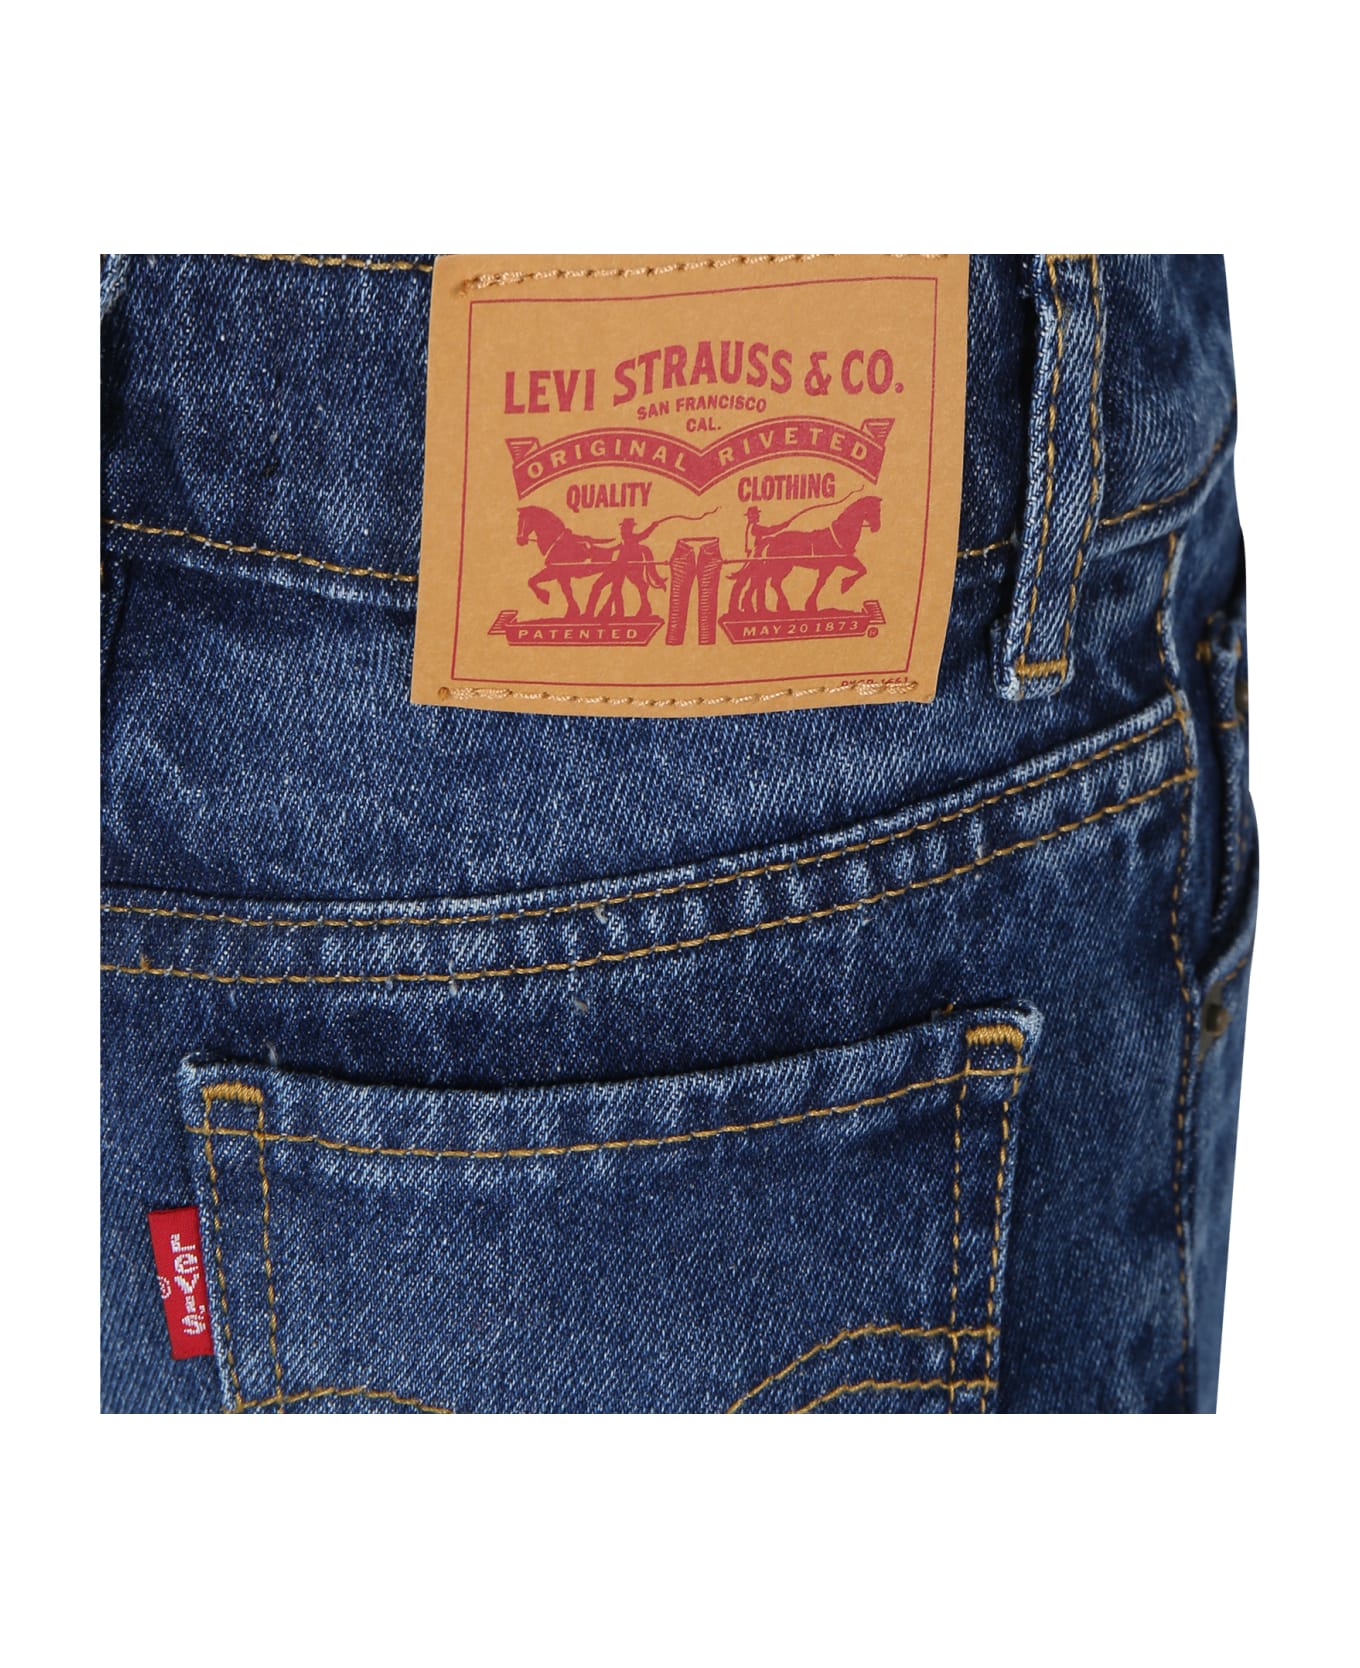 Levi's Blue Shorts For Girl With Logo - Denim ボトムス